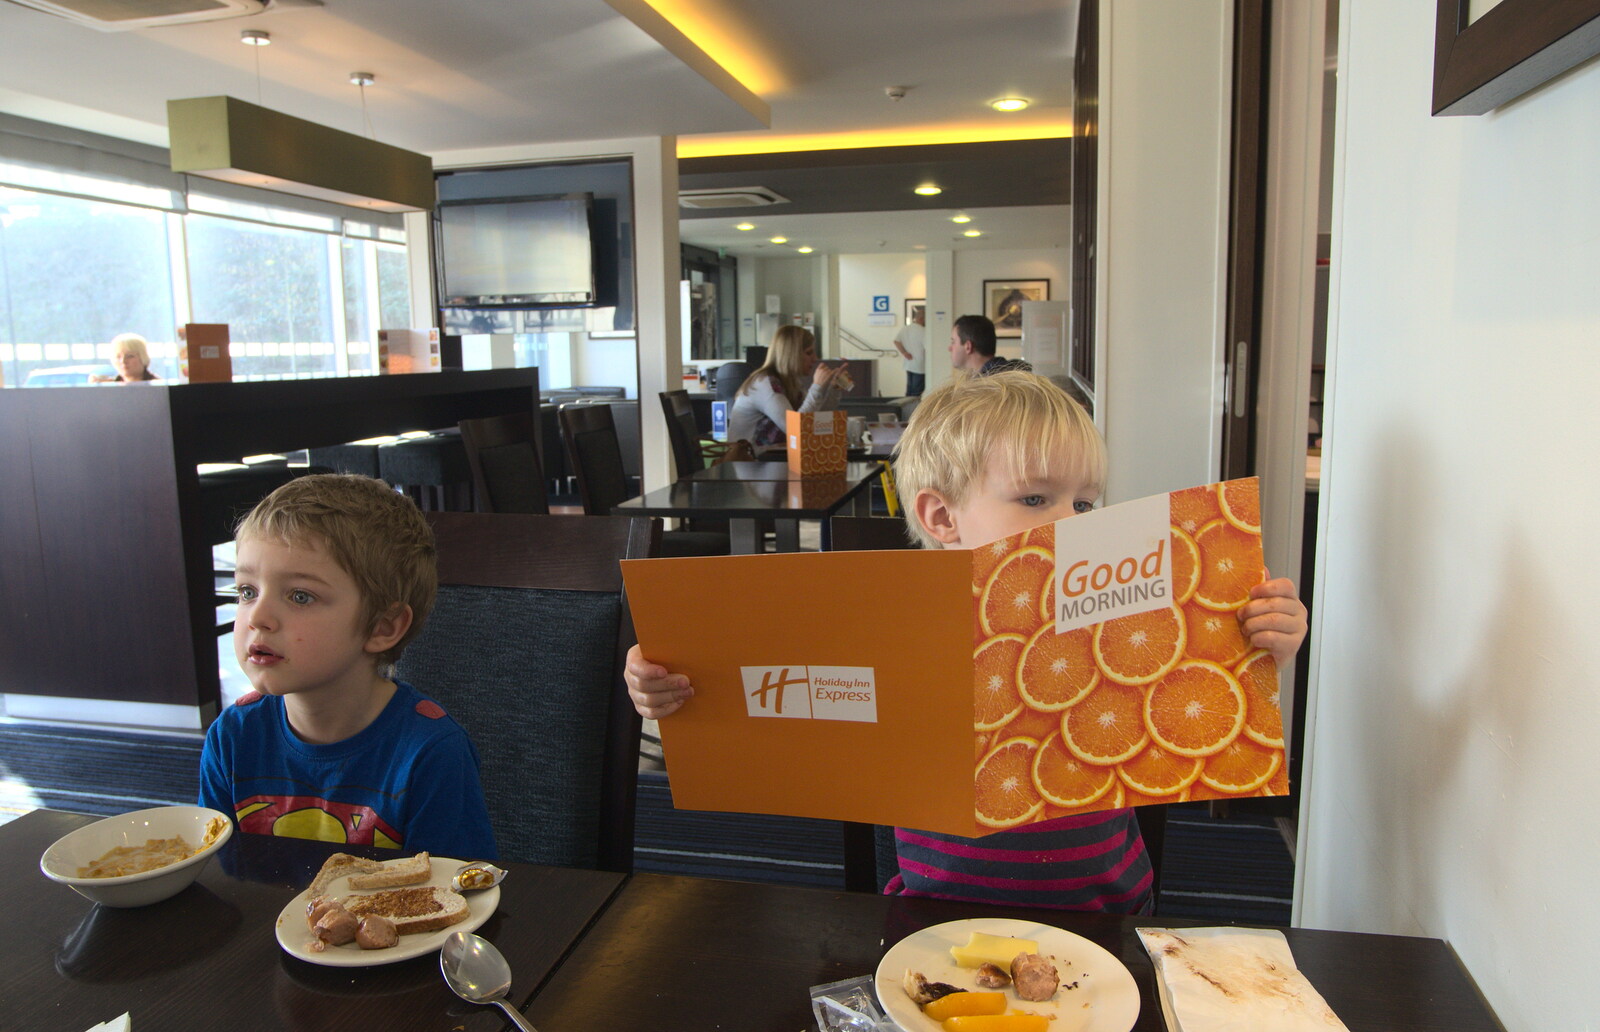 Harry checks out the breakfast menu at the Hotel from A Day Out at Duxford, Cambridgeshire - 9th March 2014